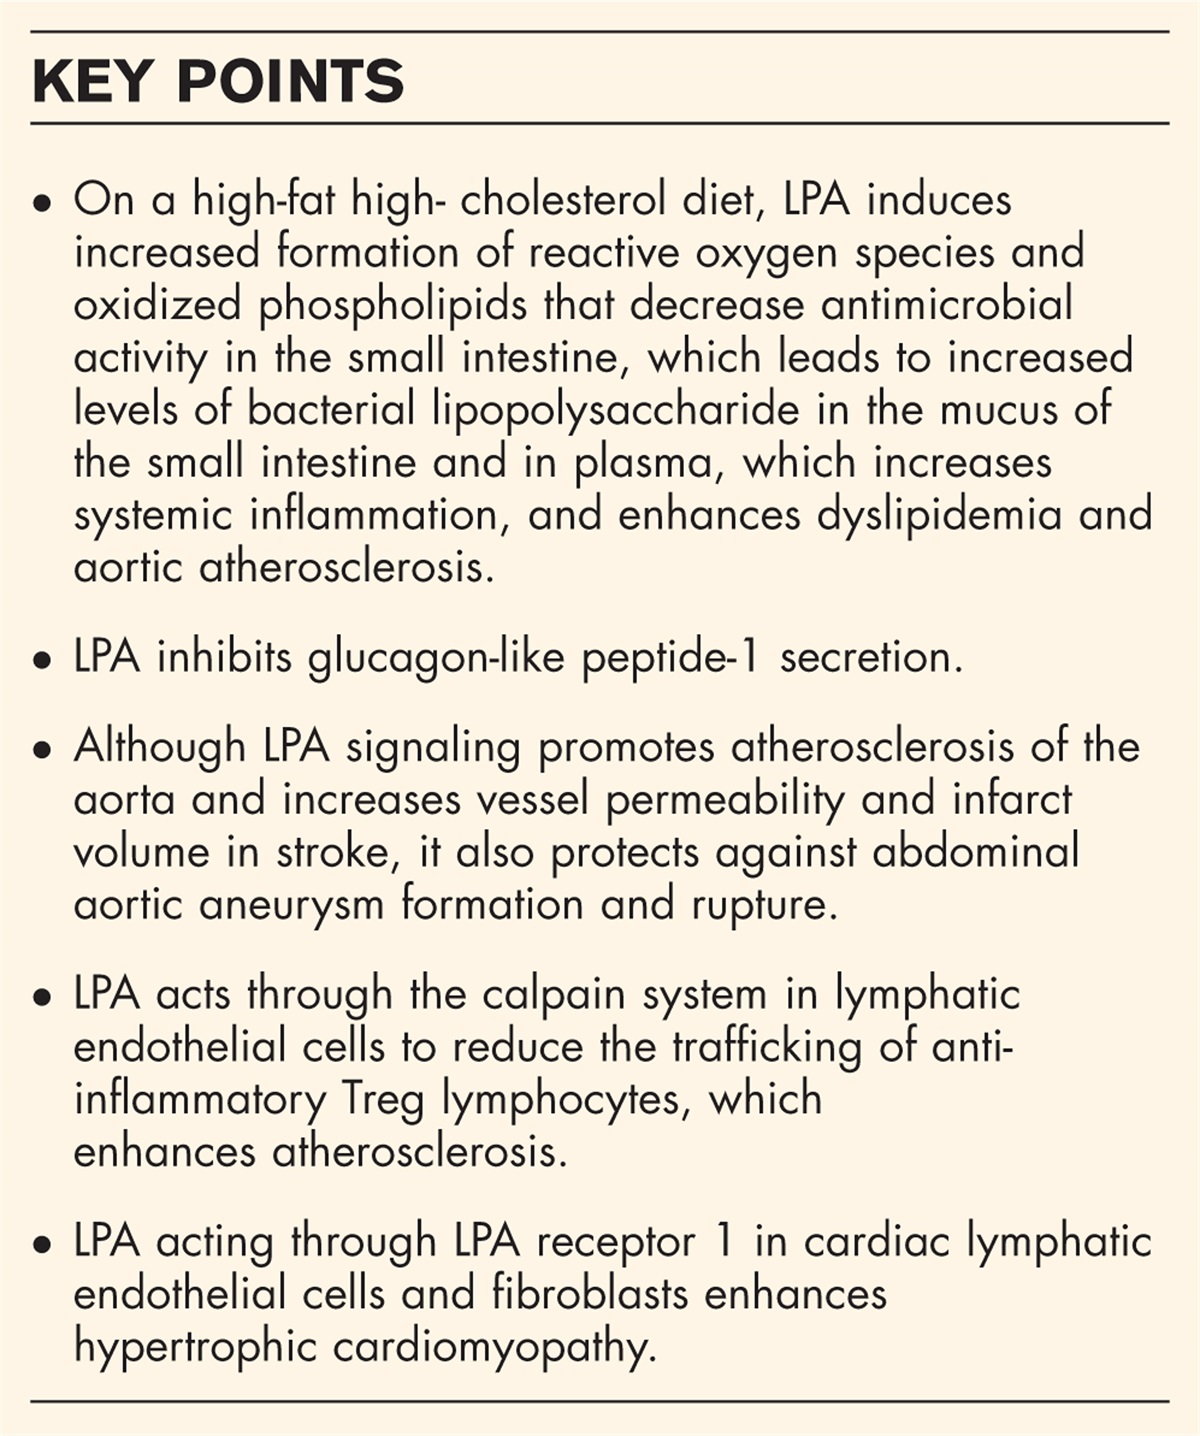 The multiple roles of lysophosphatidic acid in vascular disease and atherosclerosis